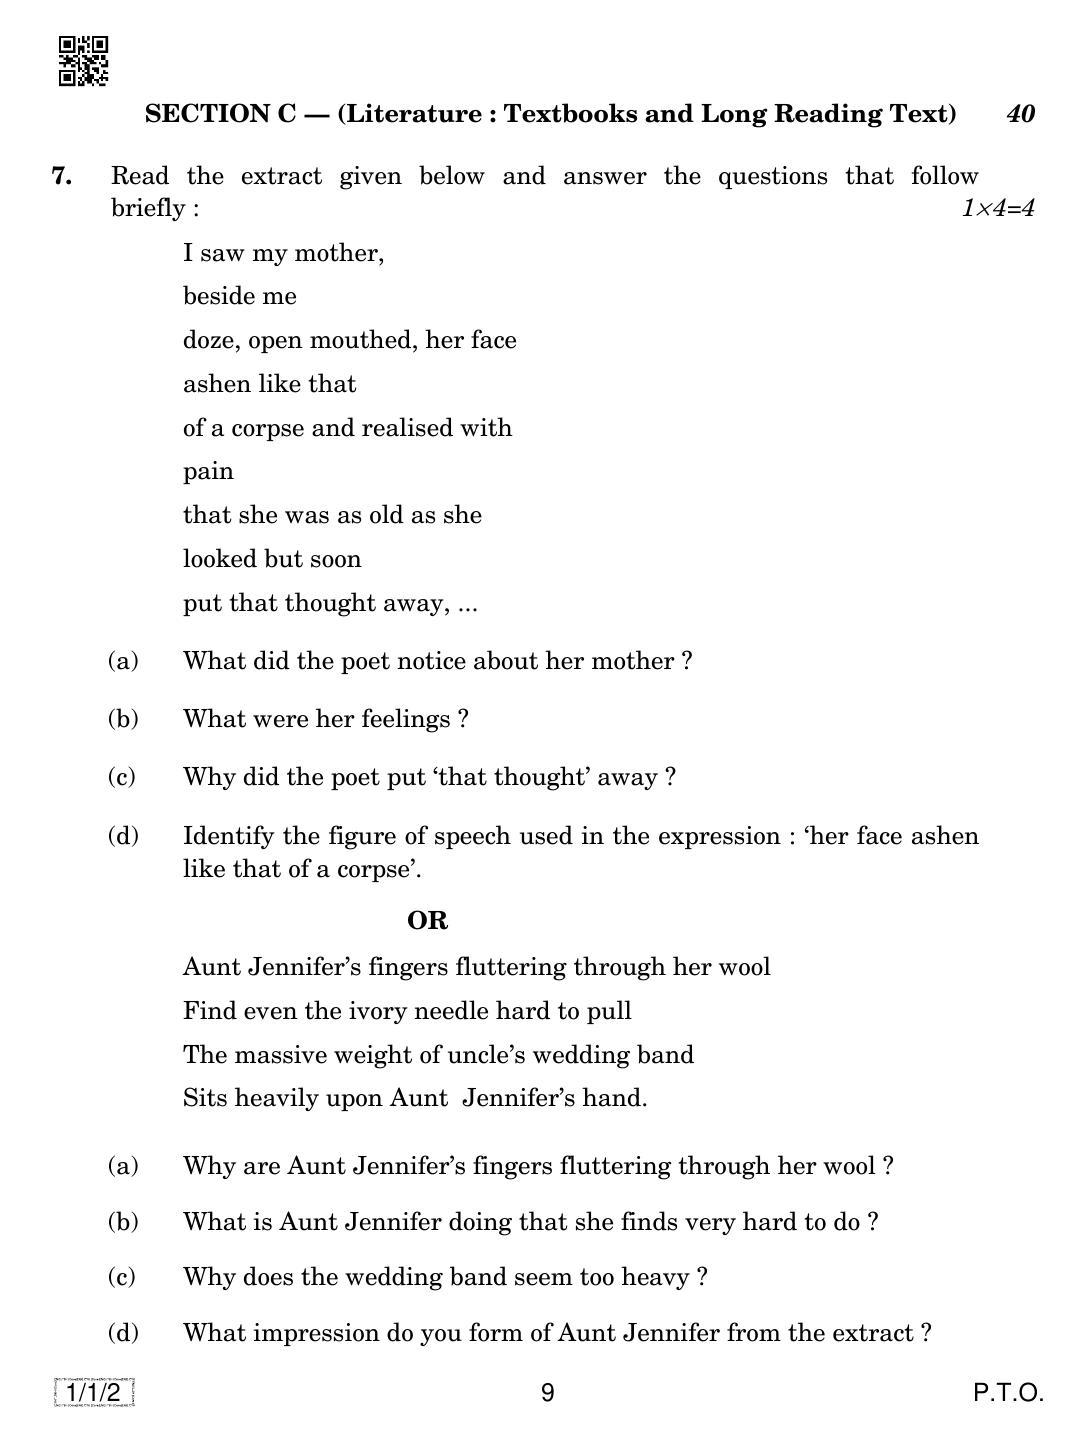 CBSE Class 12 1-1-2 ENGLISH CORE 2019 Compartment Question Paper - Page 9